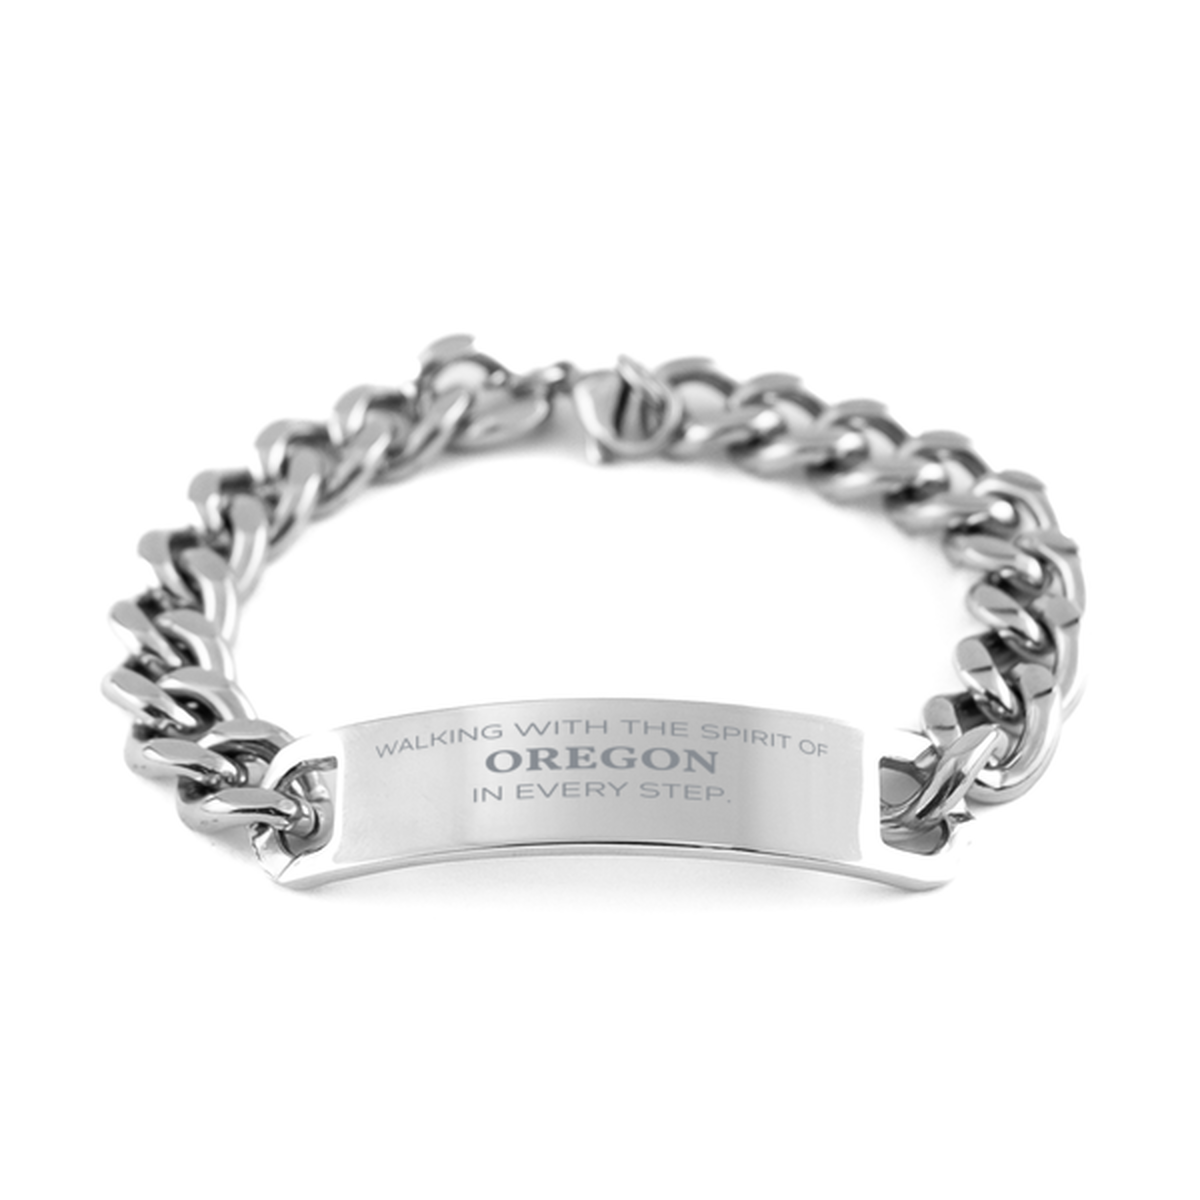 Oregon Gifts, Walking with the spirit, Love Oregon Birthday Christmas Cuban Chain Stainless Steel Bracelet For Oregon People, Men, Women, Friends